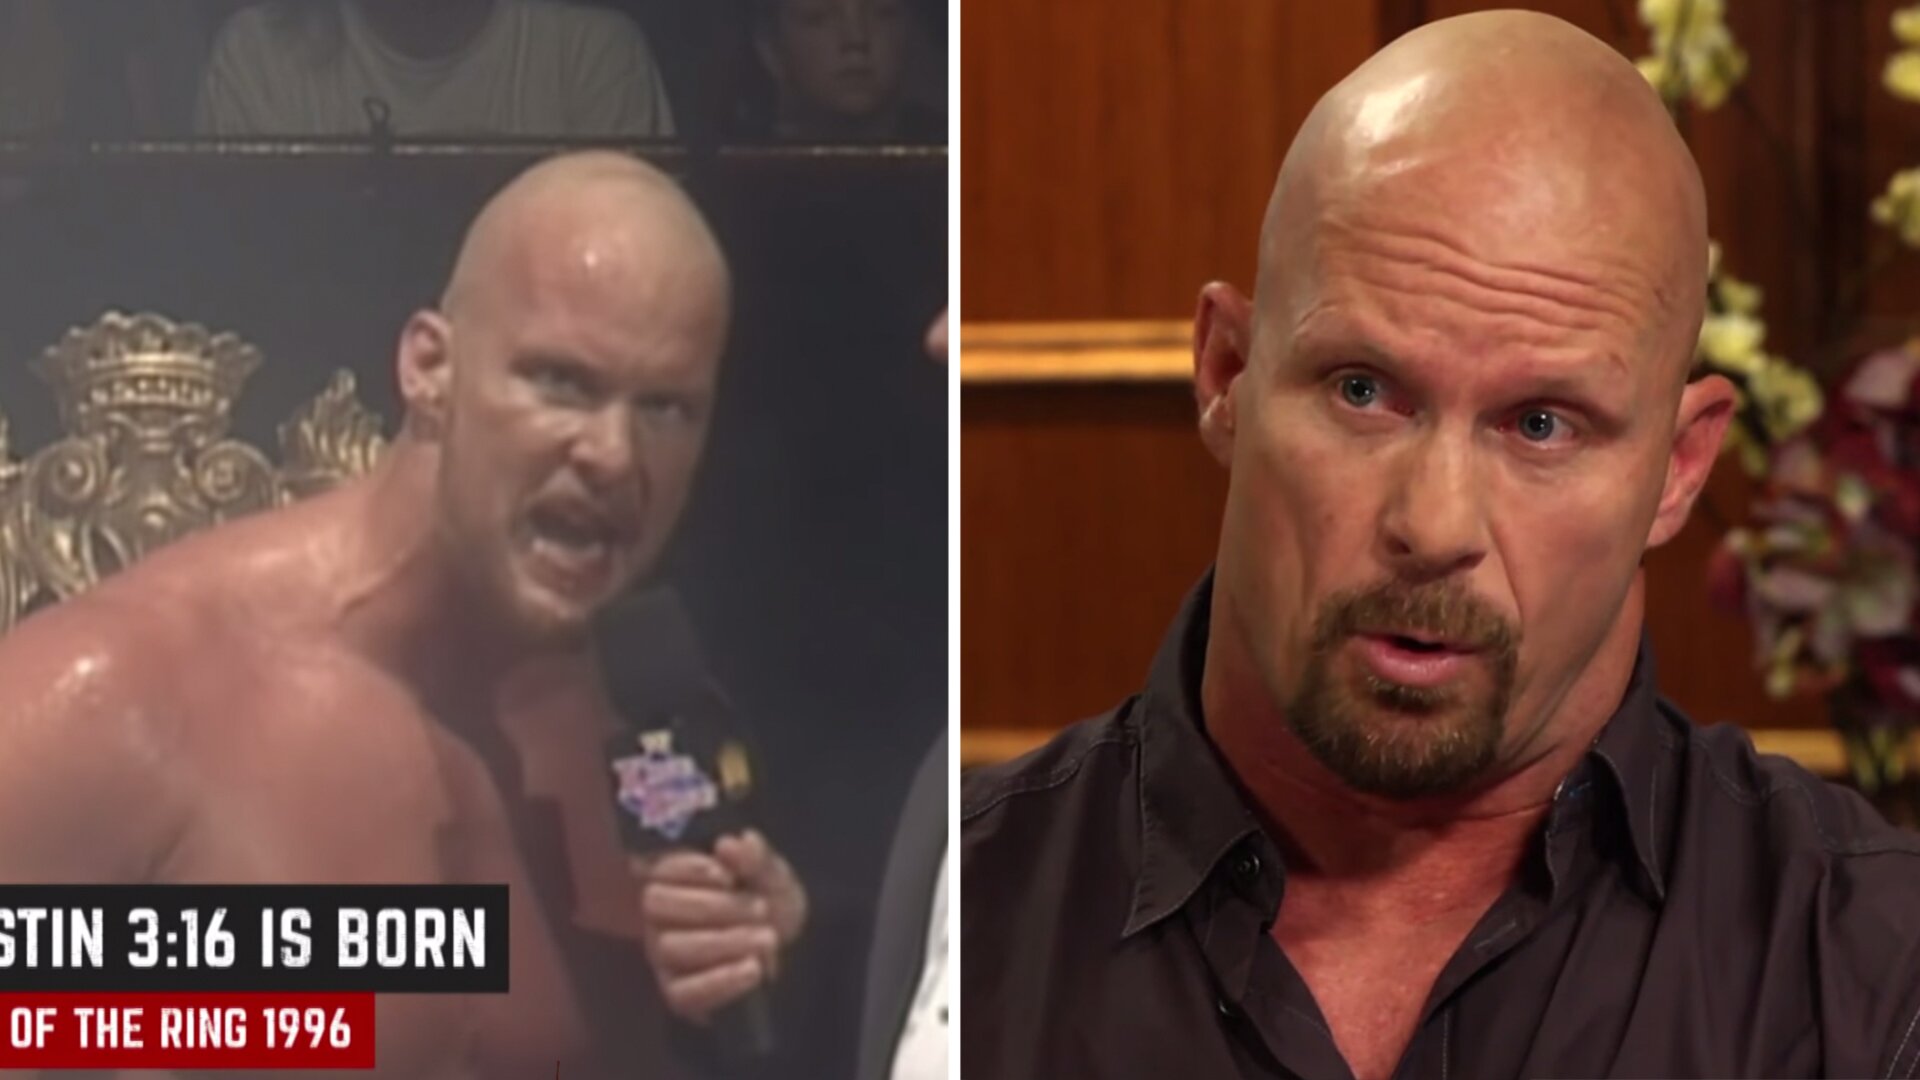 WWE Wrestling legend Steve Austin surprisingly weighs in on why rugby is not as popular as it could be in America